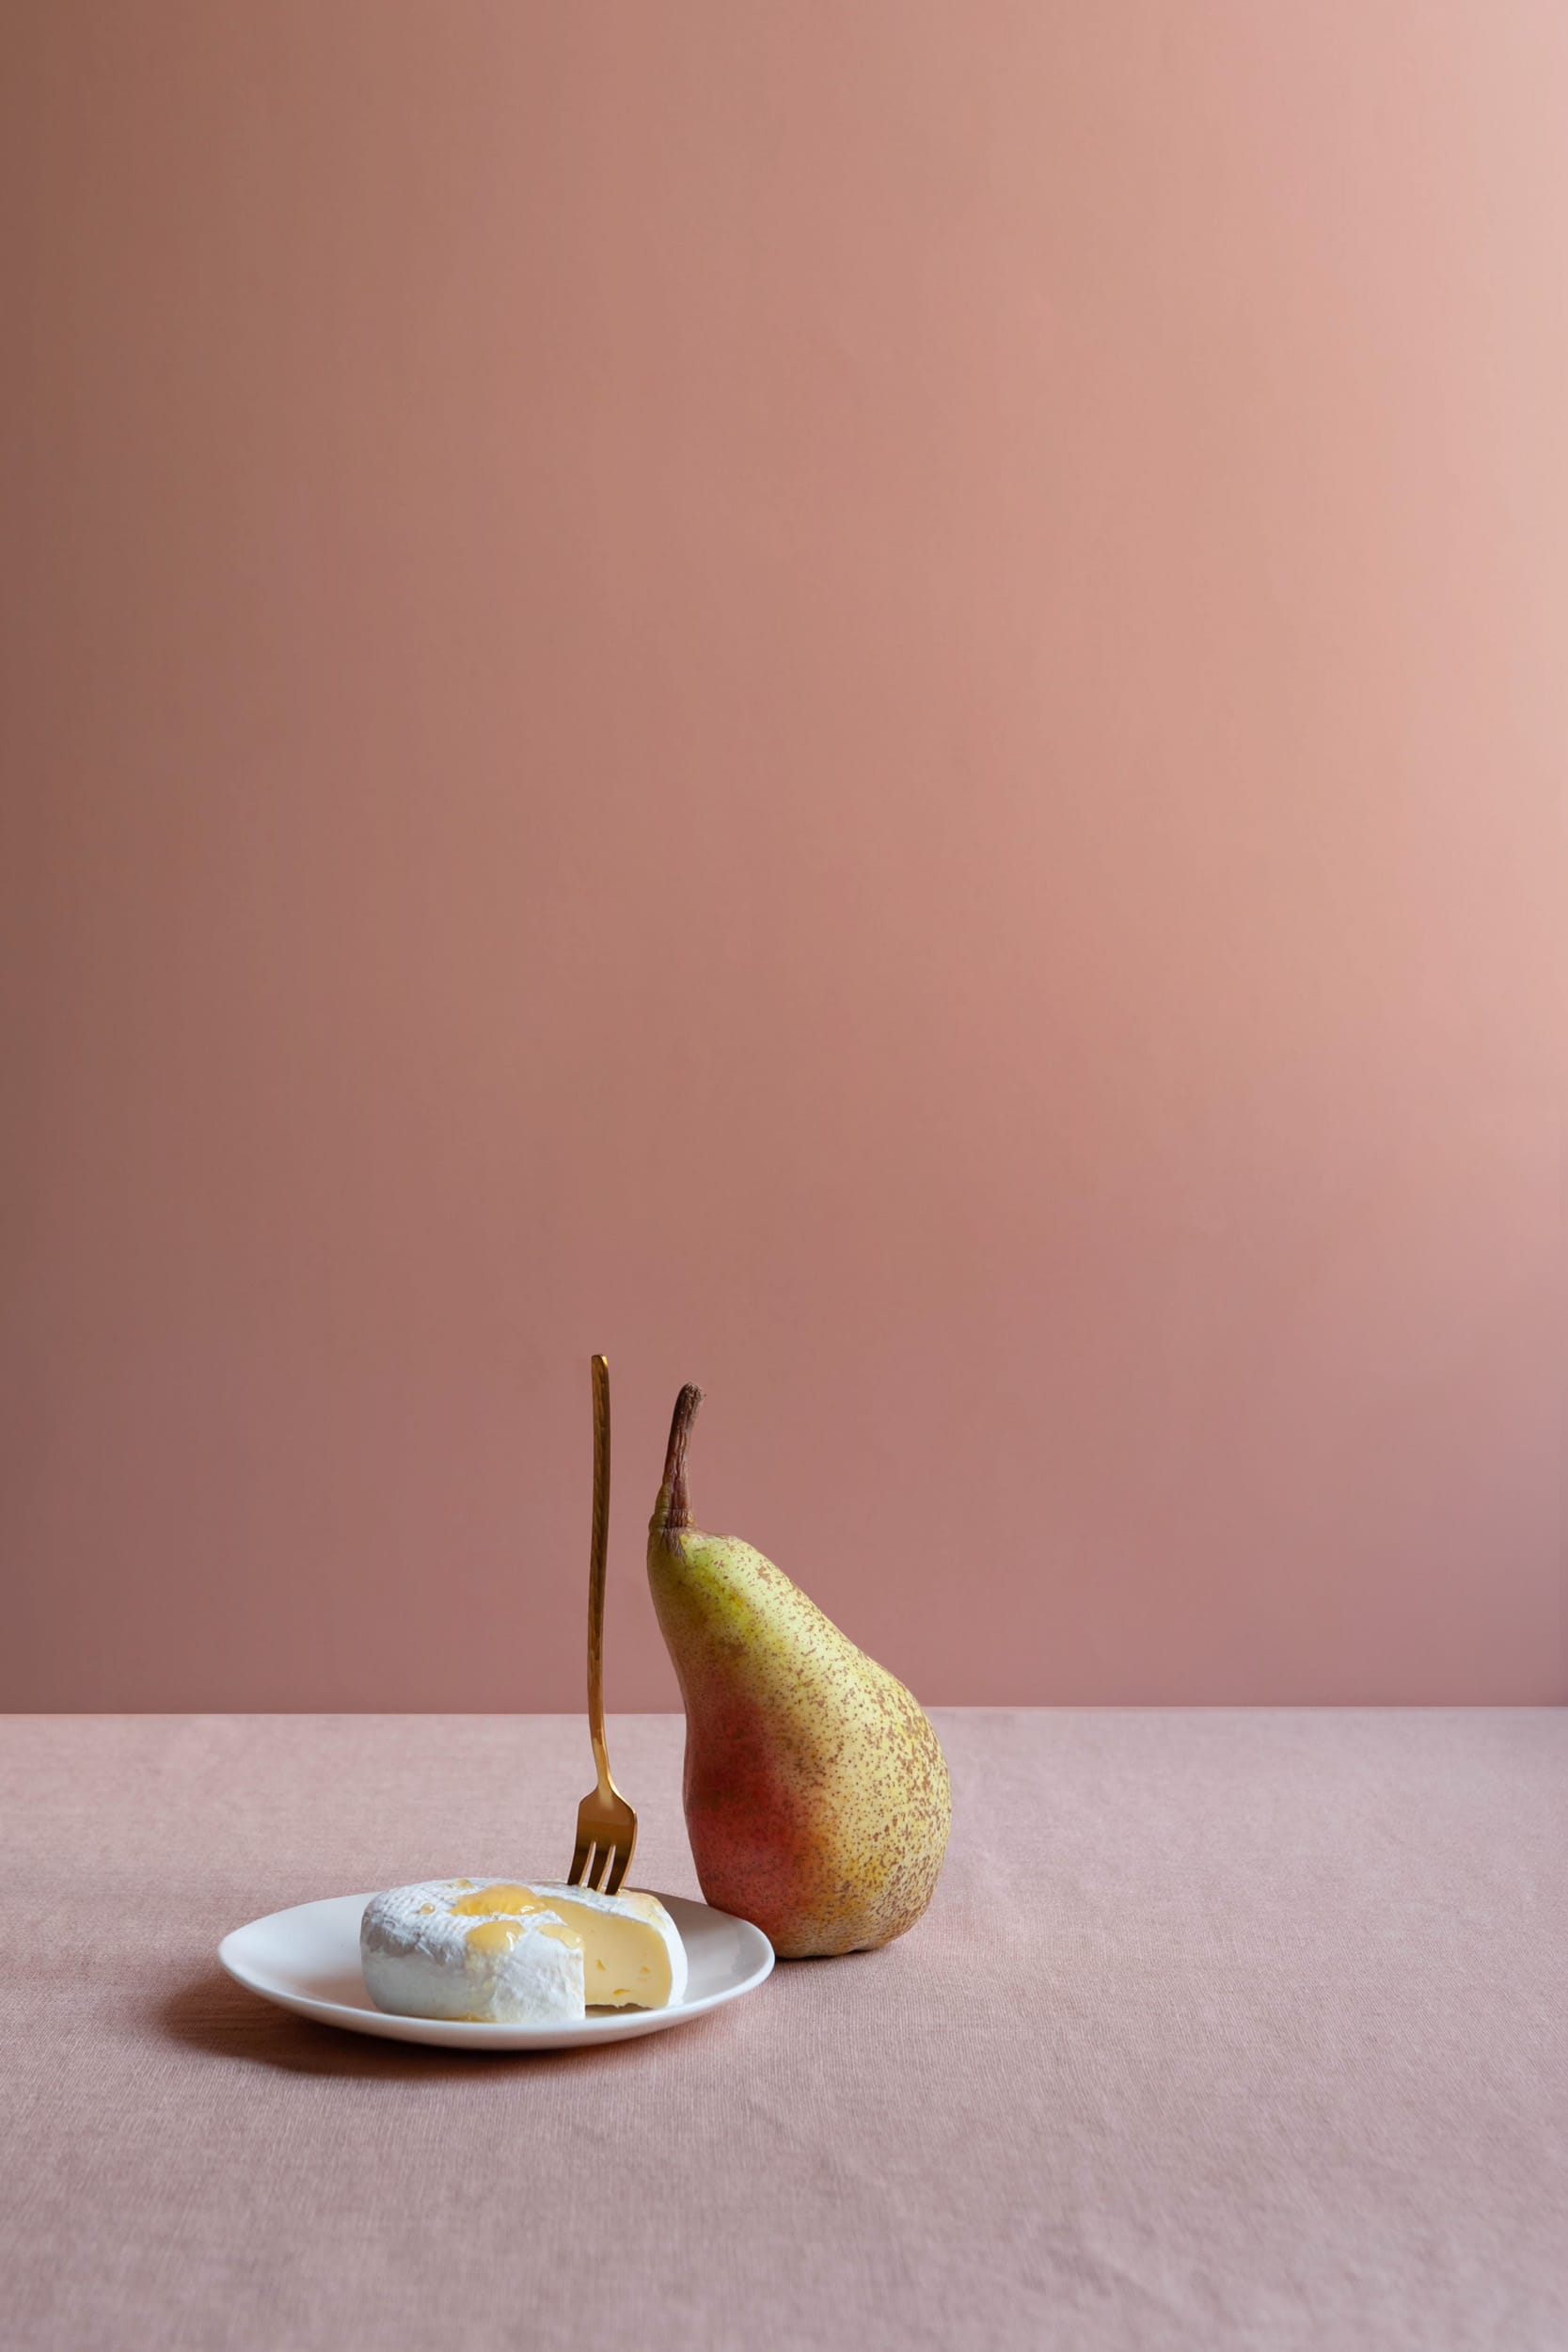 The artpiece 'Poise' by Erica Ferraroni shows a still life photo, with all objects in perfect equilibrium. A golden fork, a pear and a honey drizzled cheese laid out against a pink background.